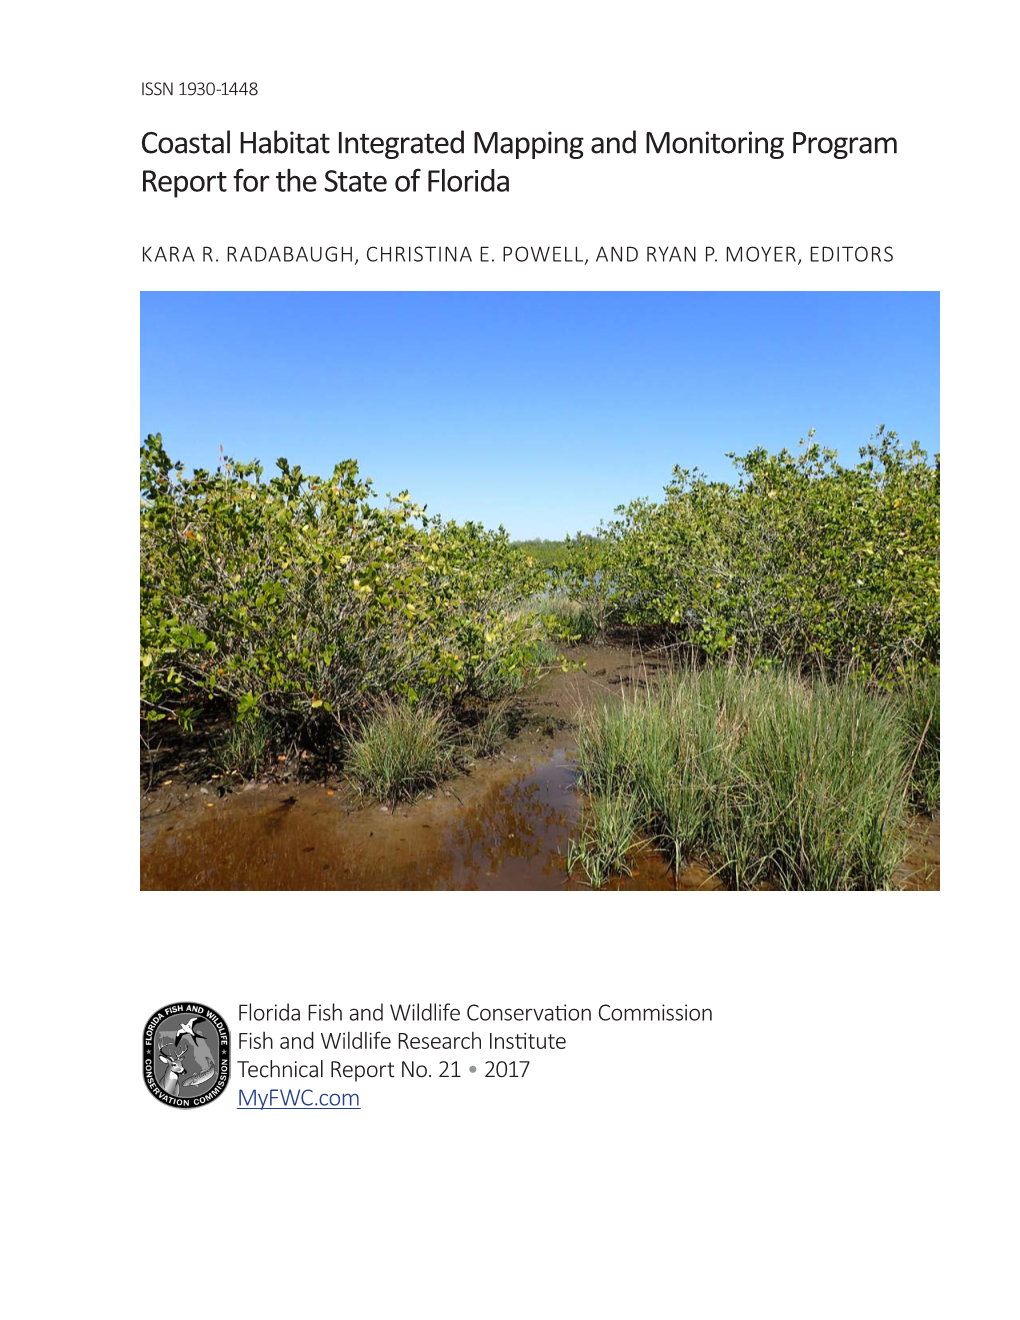 Coastal Habitat Integrated Mapping and Monitoring Program Report for the State of Florida